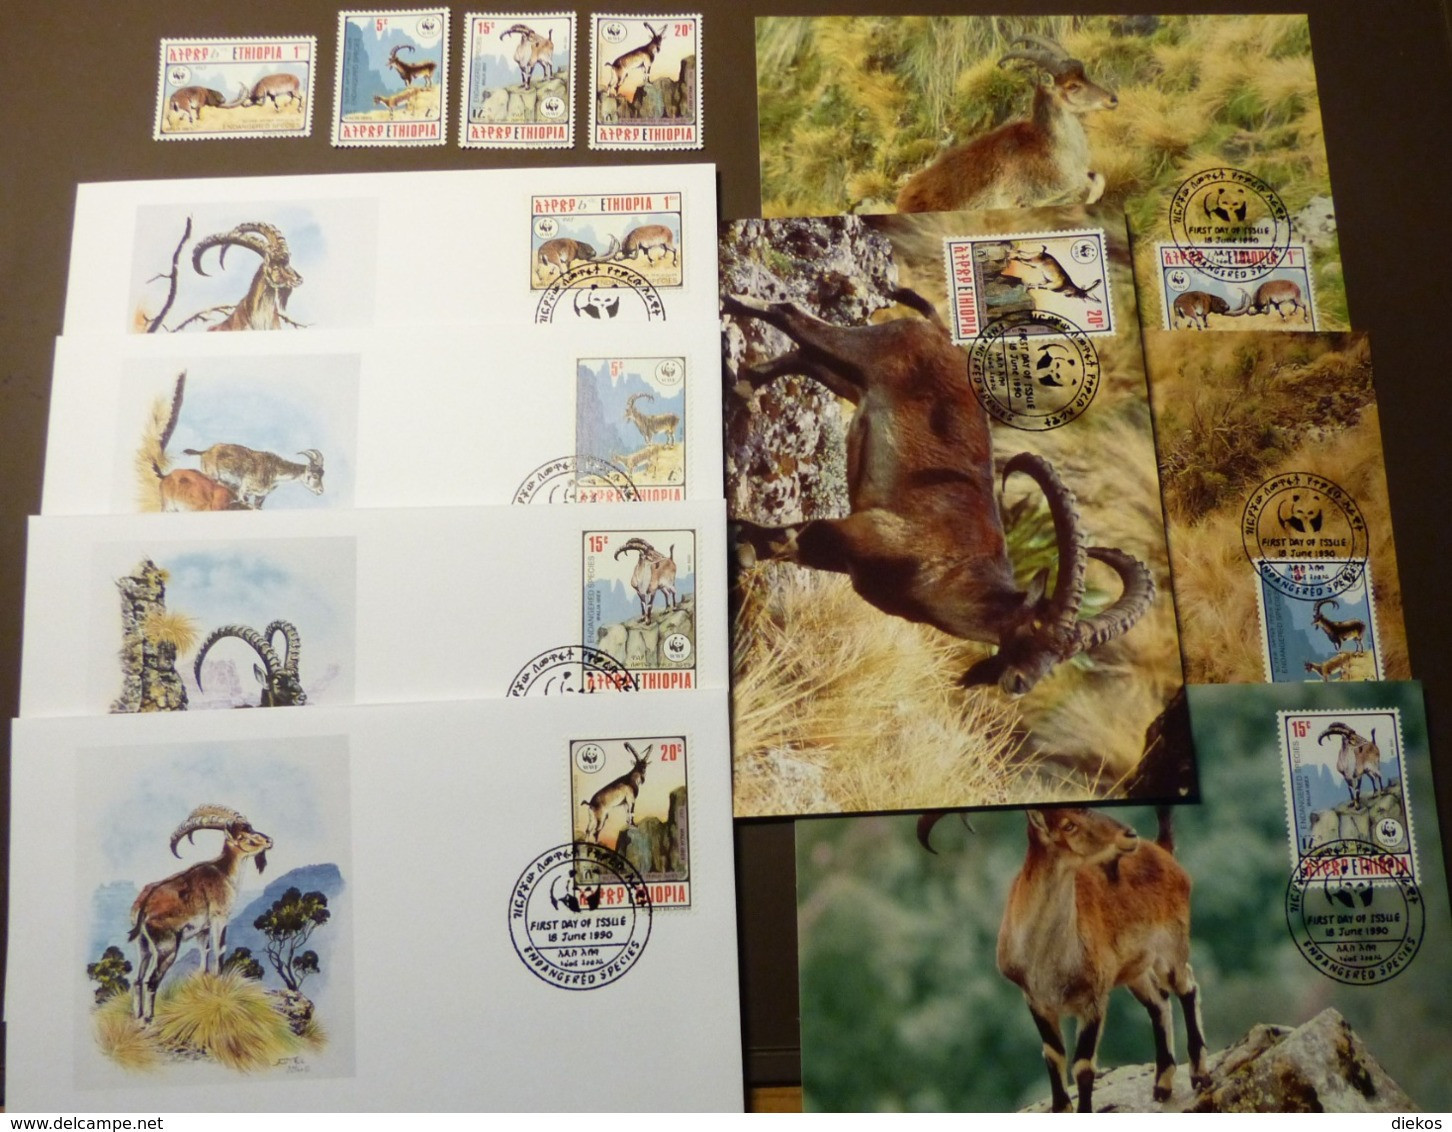 ETHIOPIA 1990 Mi 1385-1388 WWF Steinbock/Walia Ibex Animaux Bouquetins Maxi Card FDC MNH ** #cover 4964 - Collections, Lots & Séries